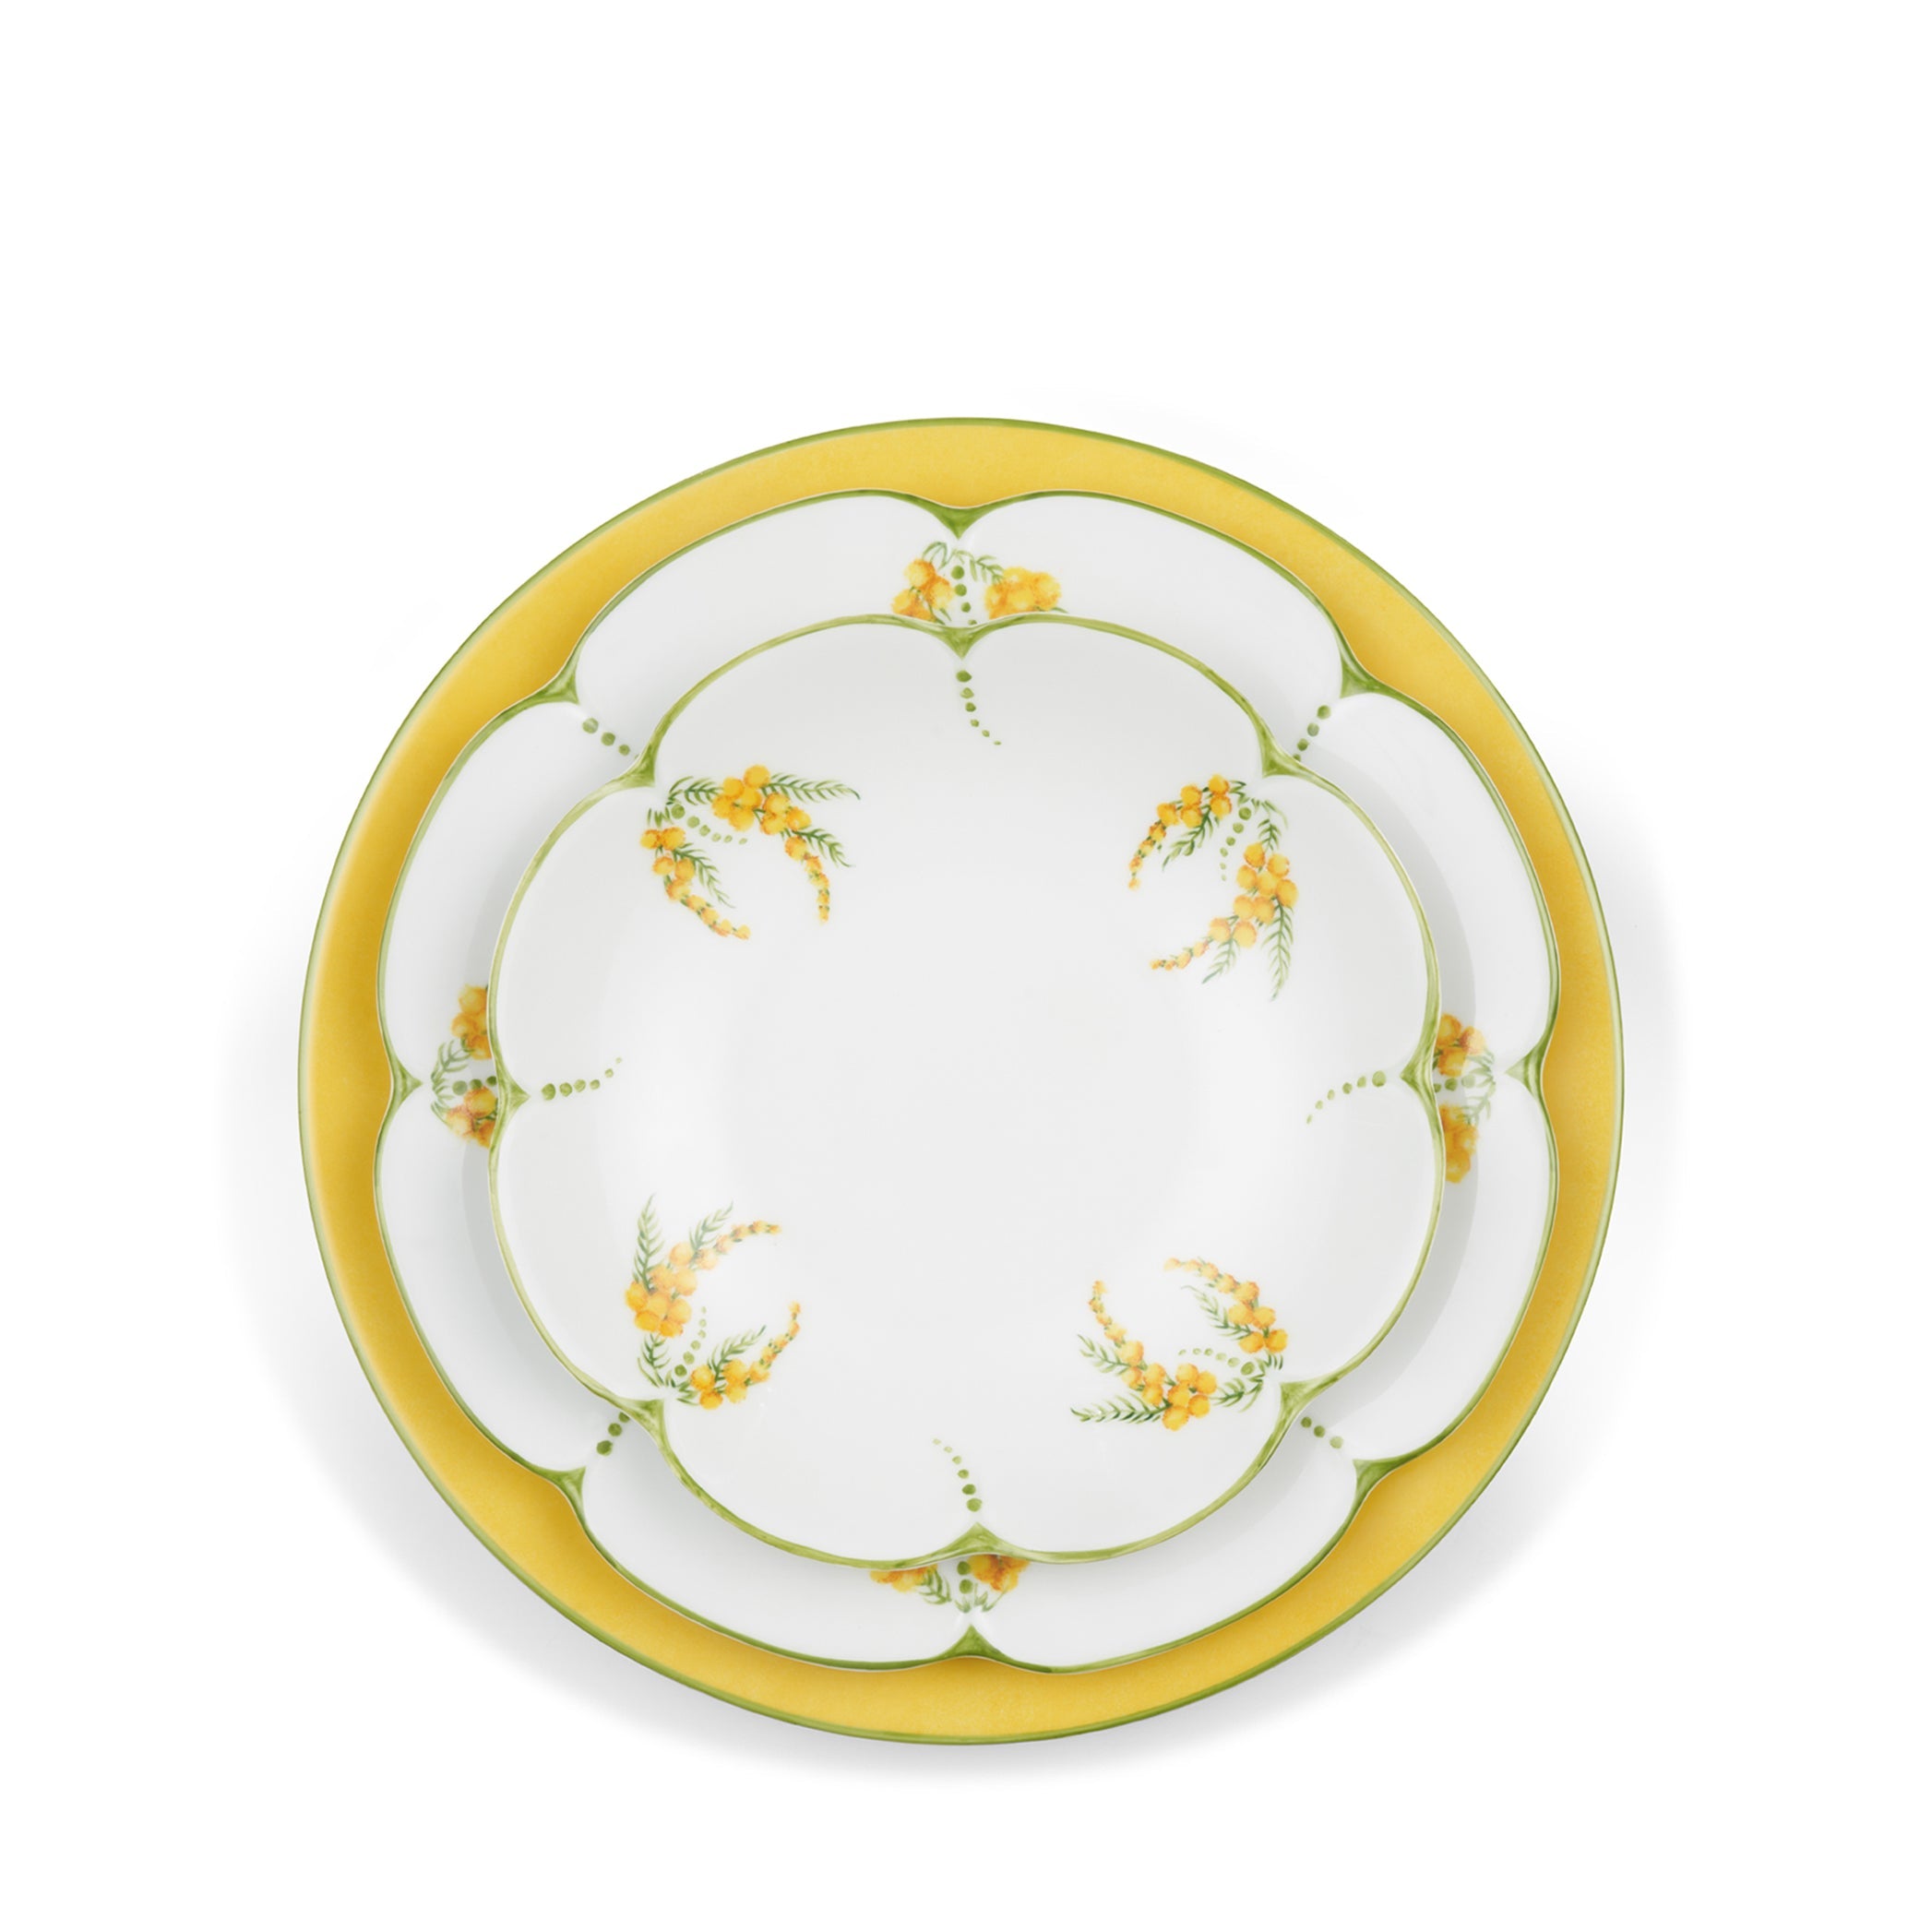 Mimosa Scalloped Hand-painted Porcelain Dinner Plate, 27cm